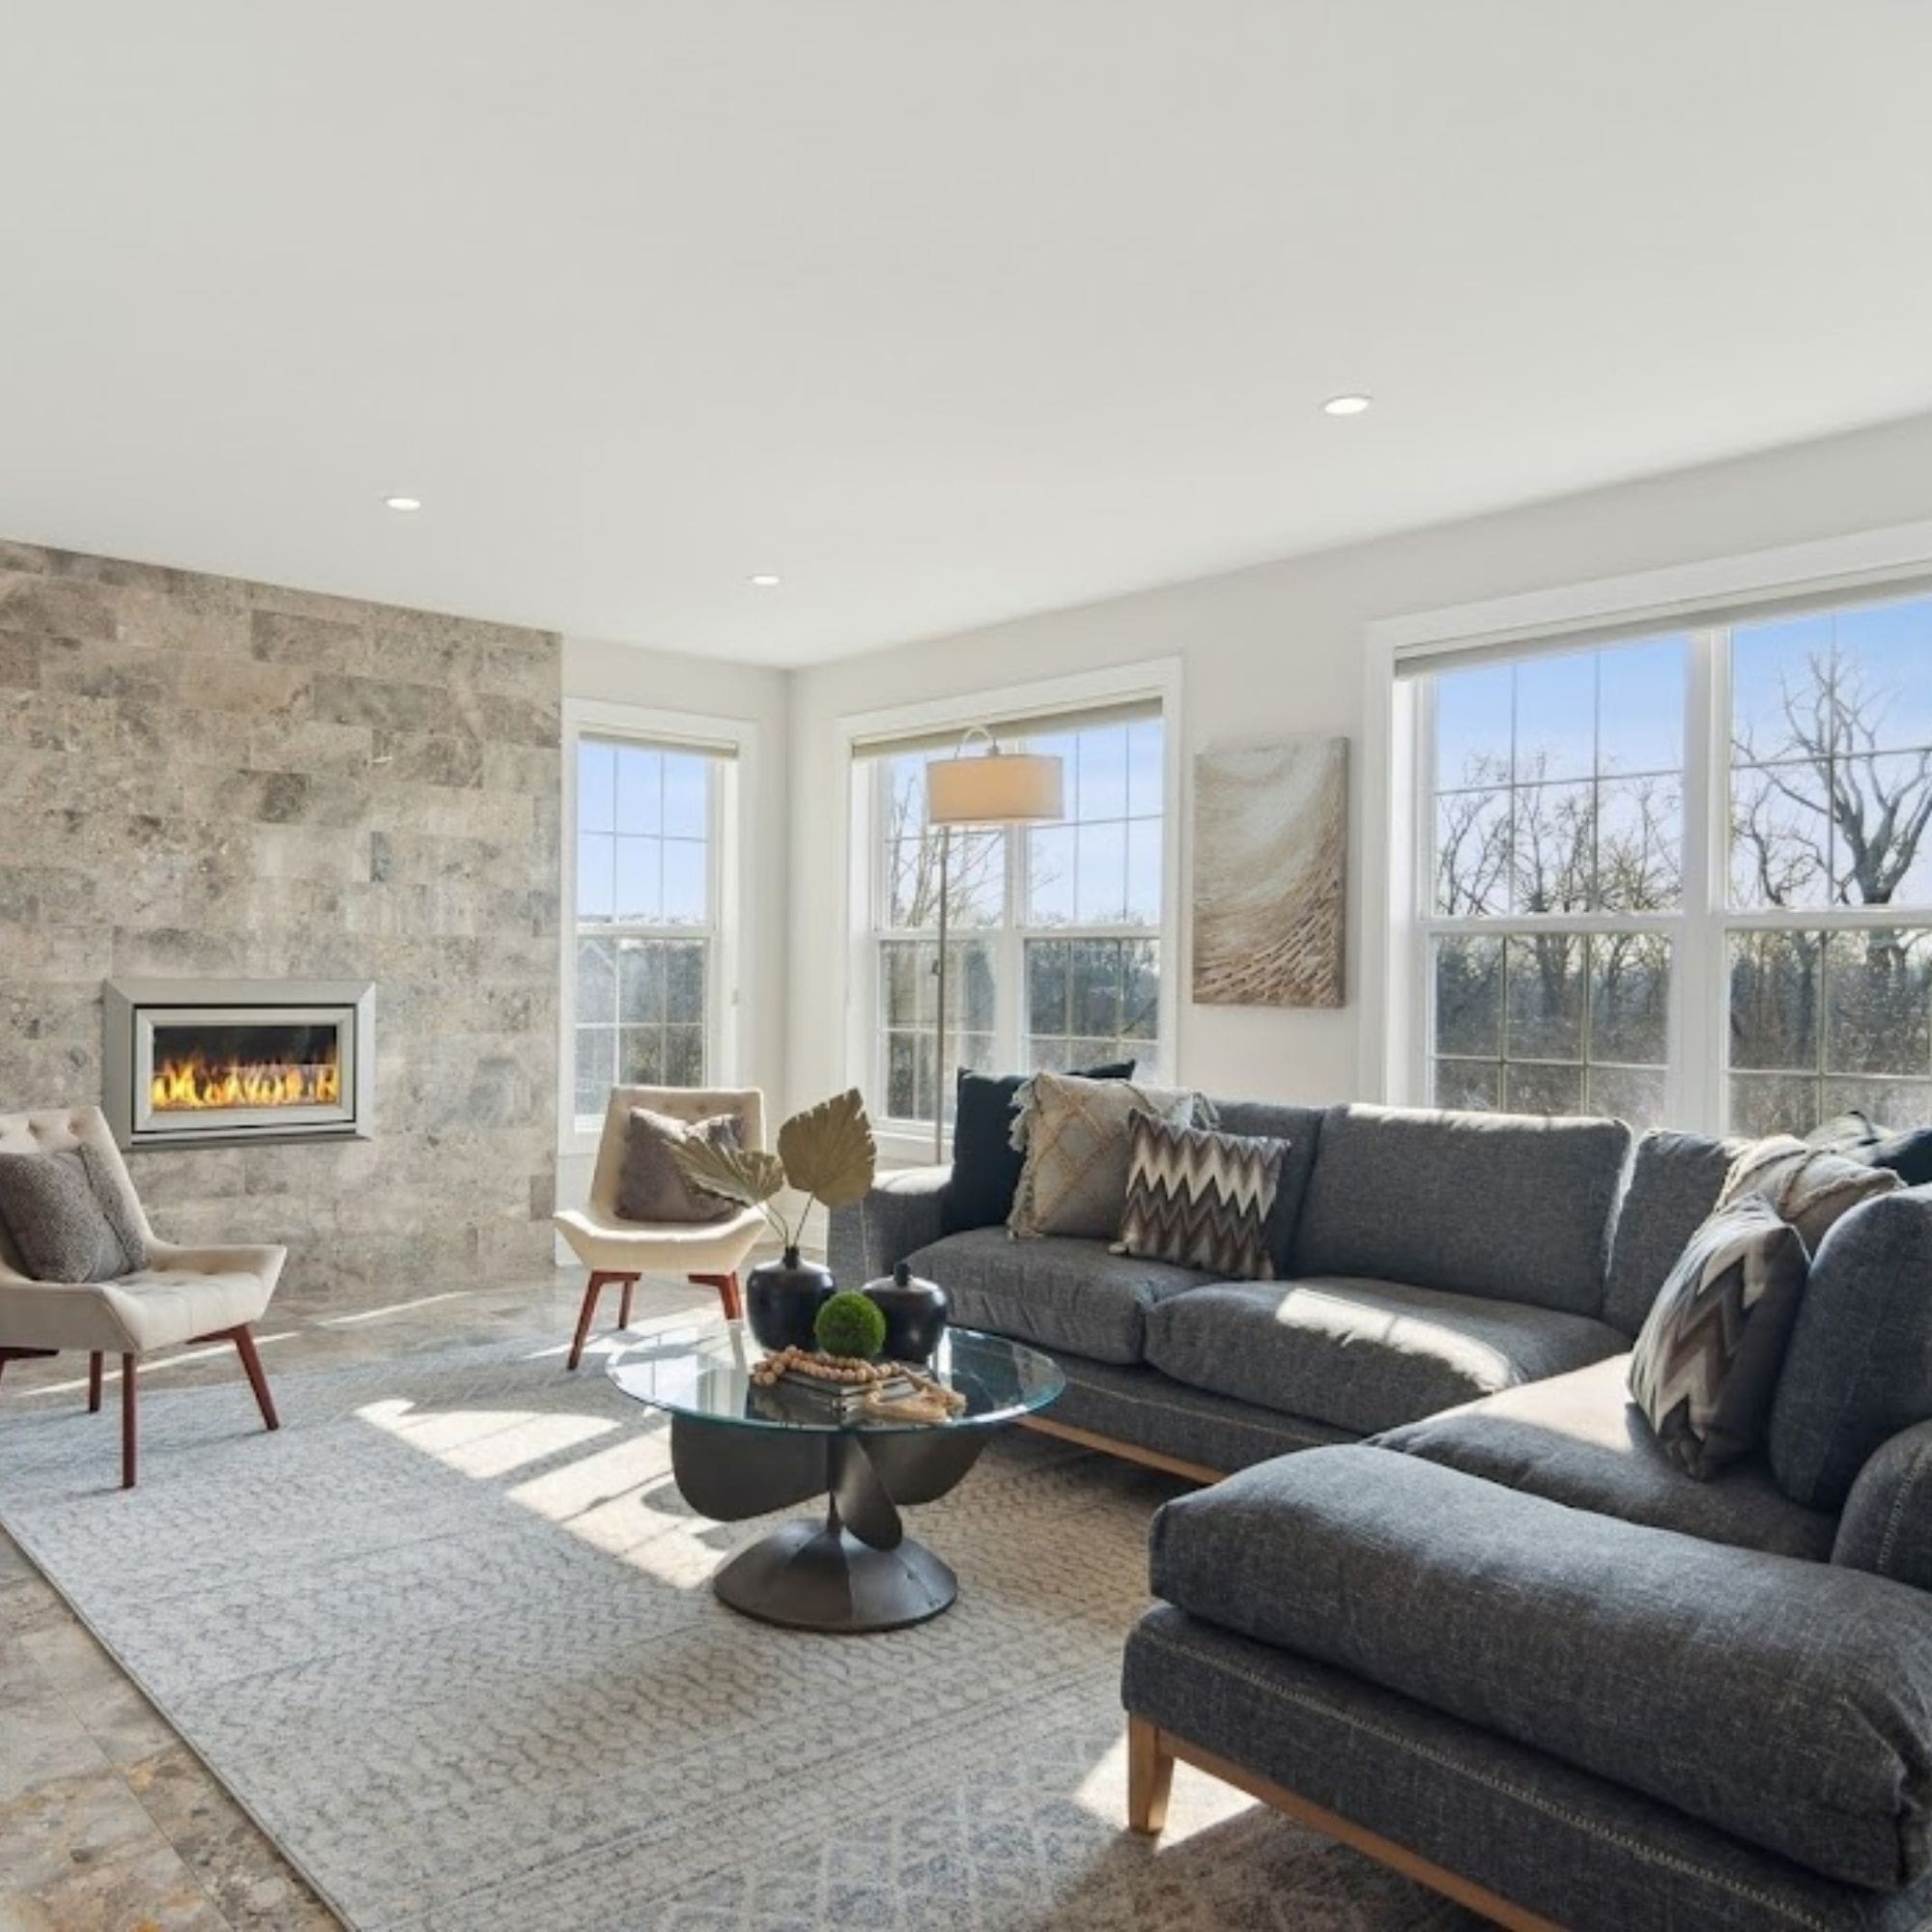 Relaxing home staged living space featuring a stunning stone fireplace and a plush couch.